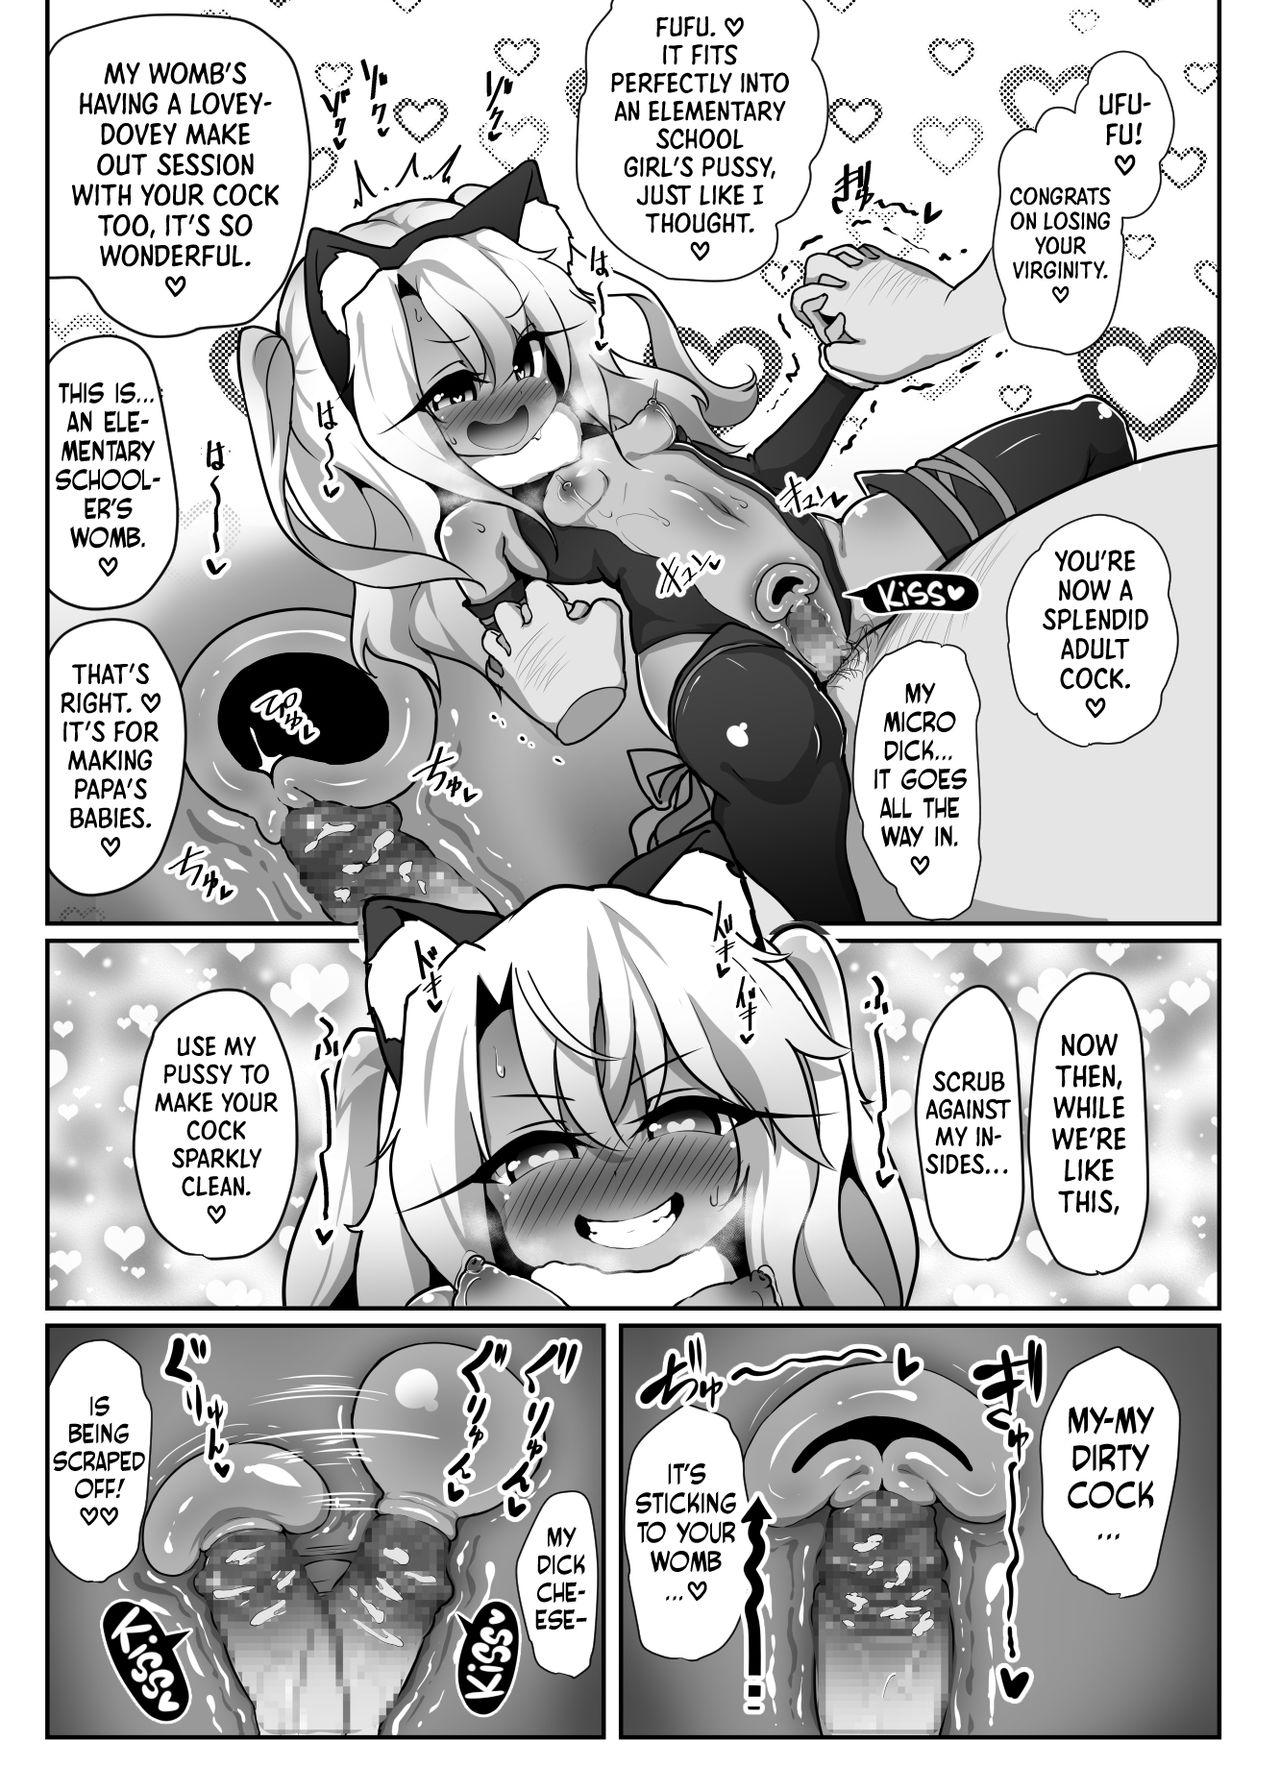 [Kotee] A book where Chloe-chan pretends to be hypnotized and relentlessly gives birth over and over to a disgusting old micro-dicked virgin’s babies. (Fate/kaleid liner Prisma Illya) [English] [Secluded] [Digital] 17